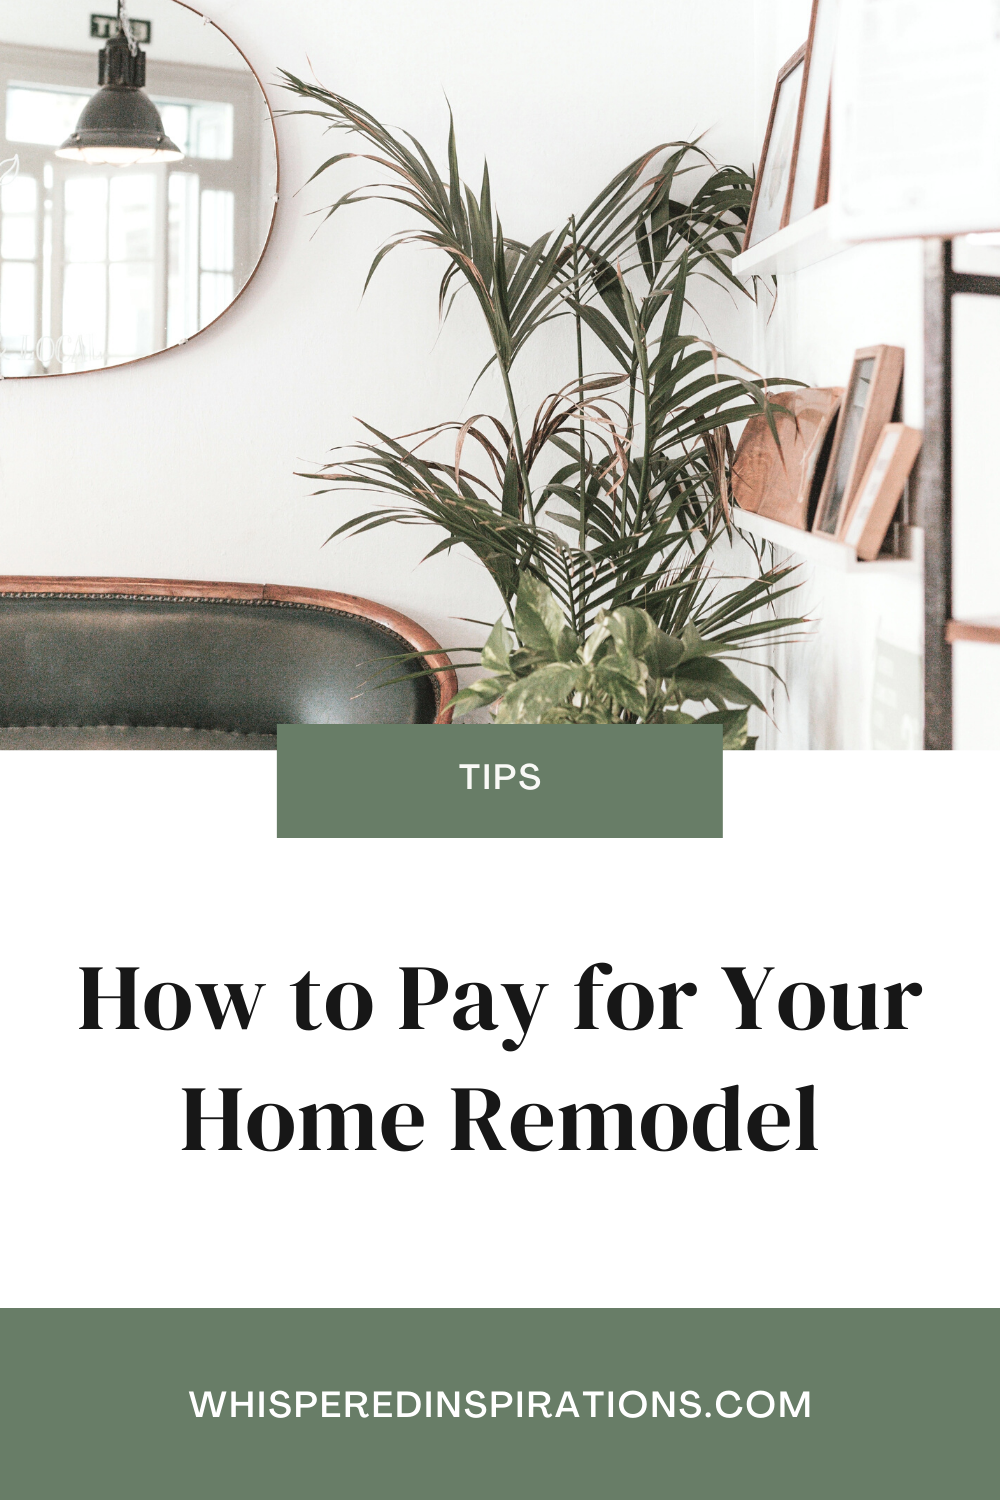 A shot of a living room with a plant and mirror are shown. There is a couch. This article covers how to pay for your home renovation.